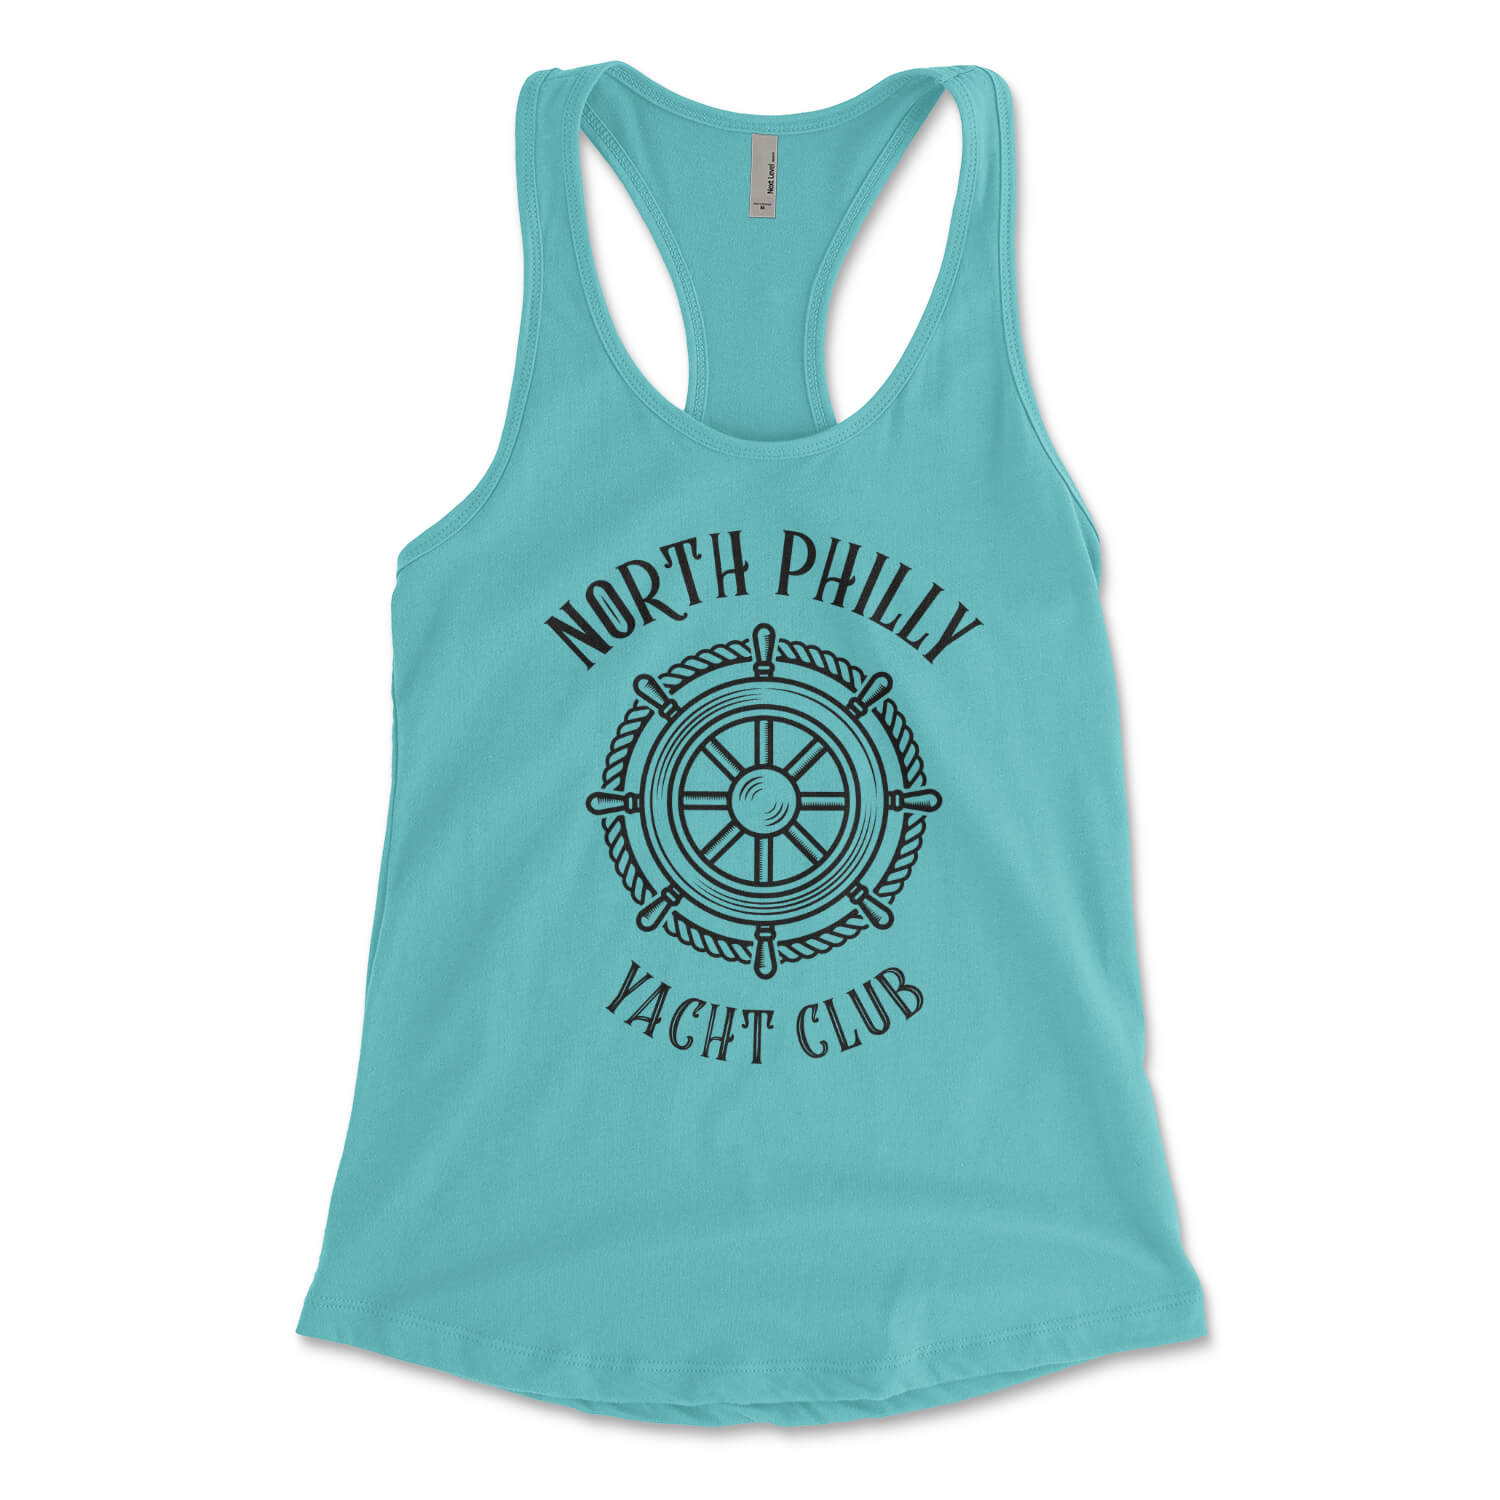 North Philly Yacht Club tahiti blue womens racerback tank top from Phillygoat